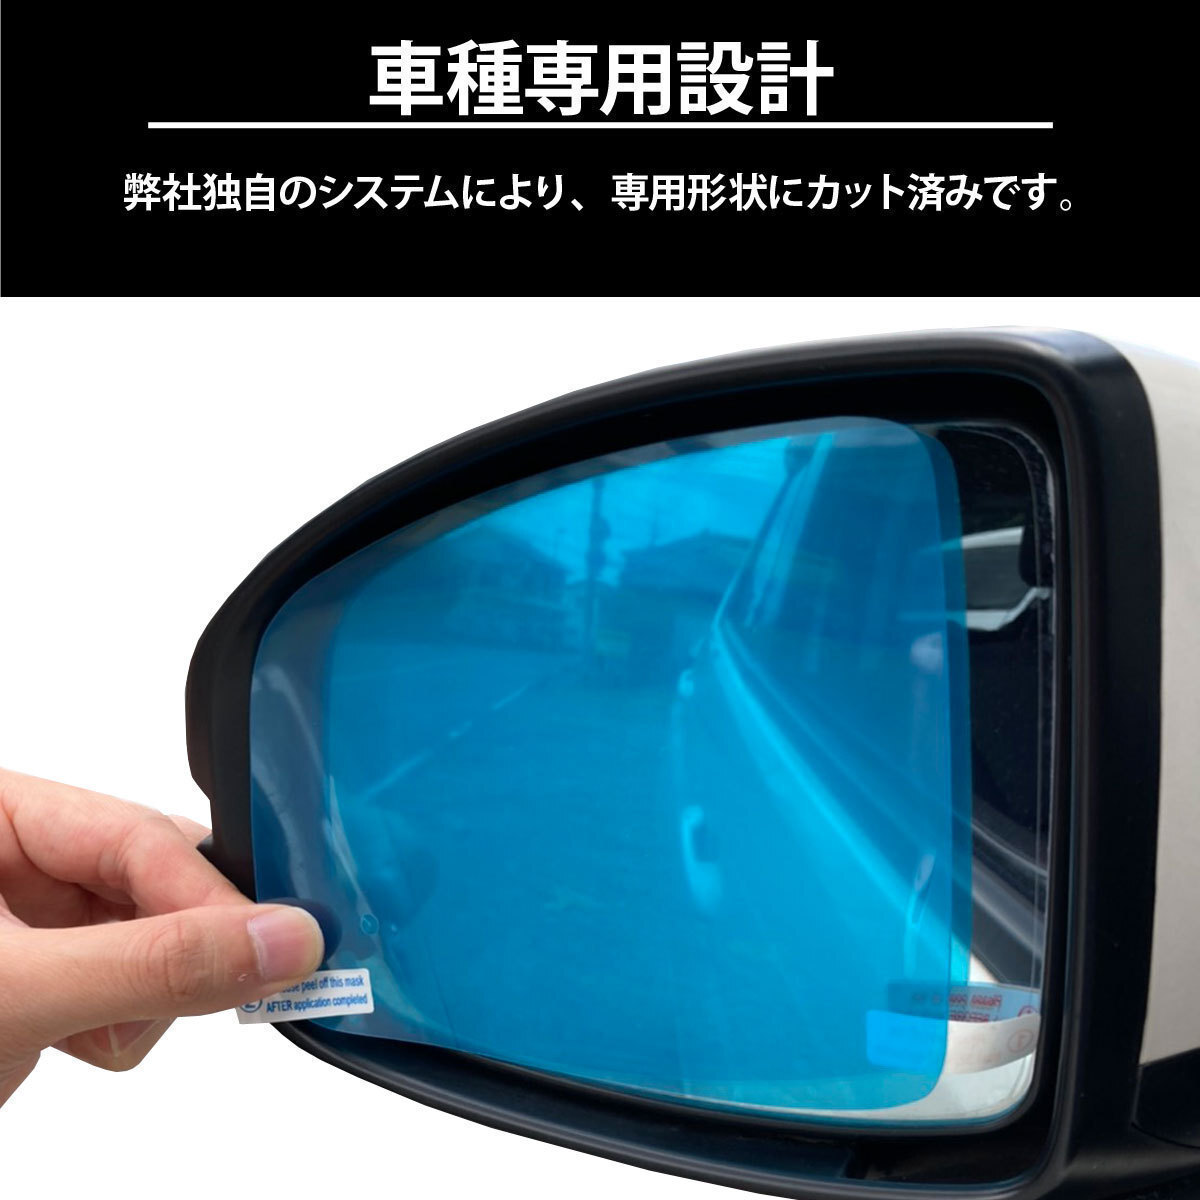  postage 185 jpy car make exclusive use Porsche Cayman 12~16 Boxster 12~16 exclusive use water-repellent door mirror film left right set water-repellent effect 6 months shipping deadline 18 hour 